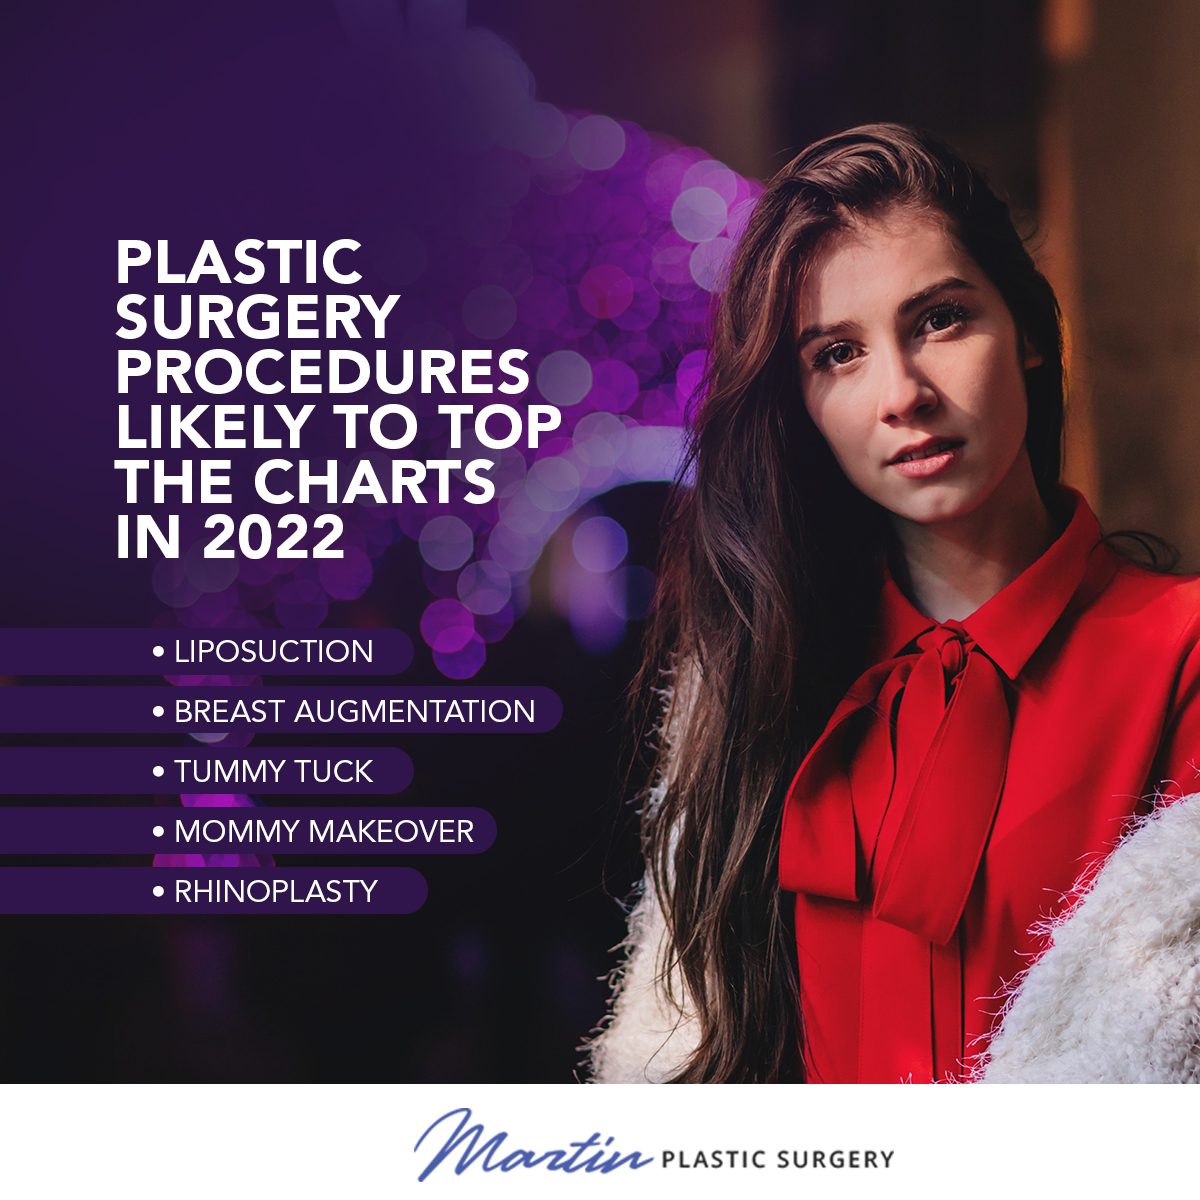 Plastic Surgery Procedures Likely To Top The Charts in 2022 [Infographic]